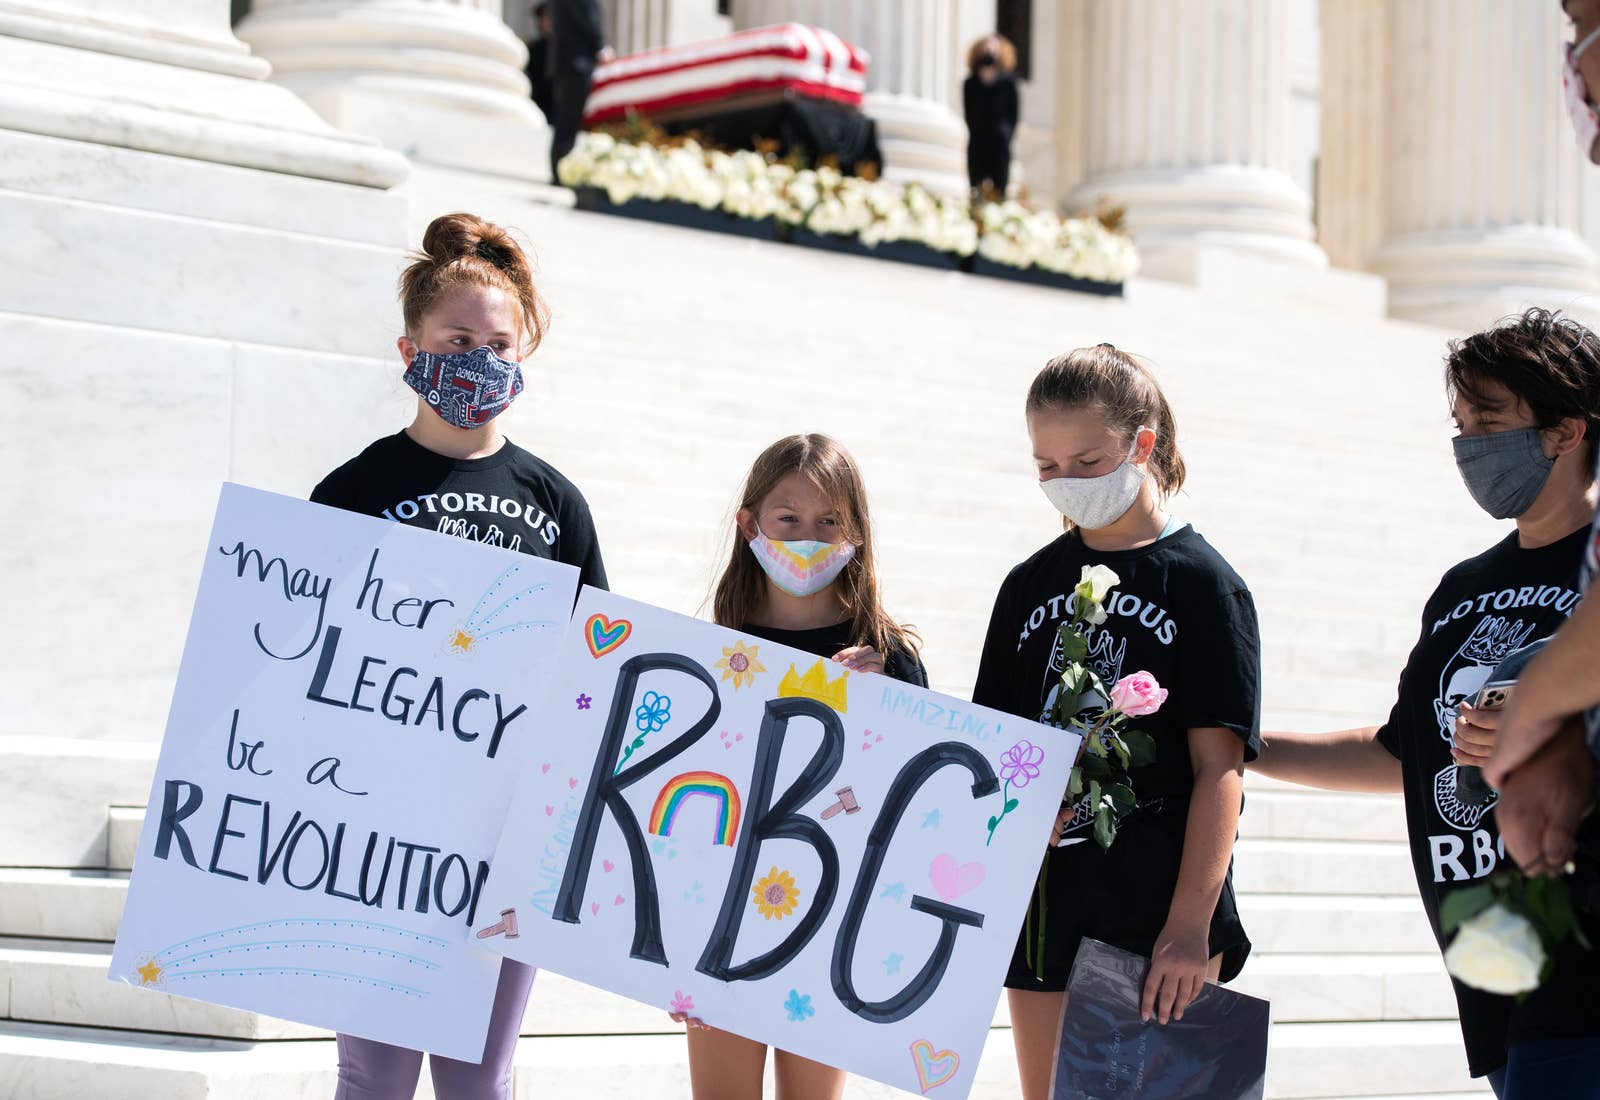 Three girls carry signs saying RGB and may her legacy be a revolution